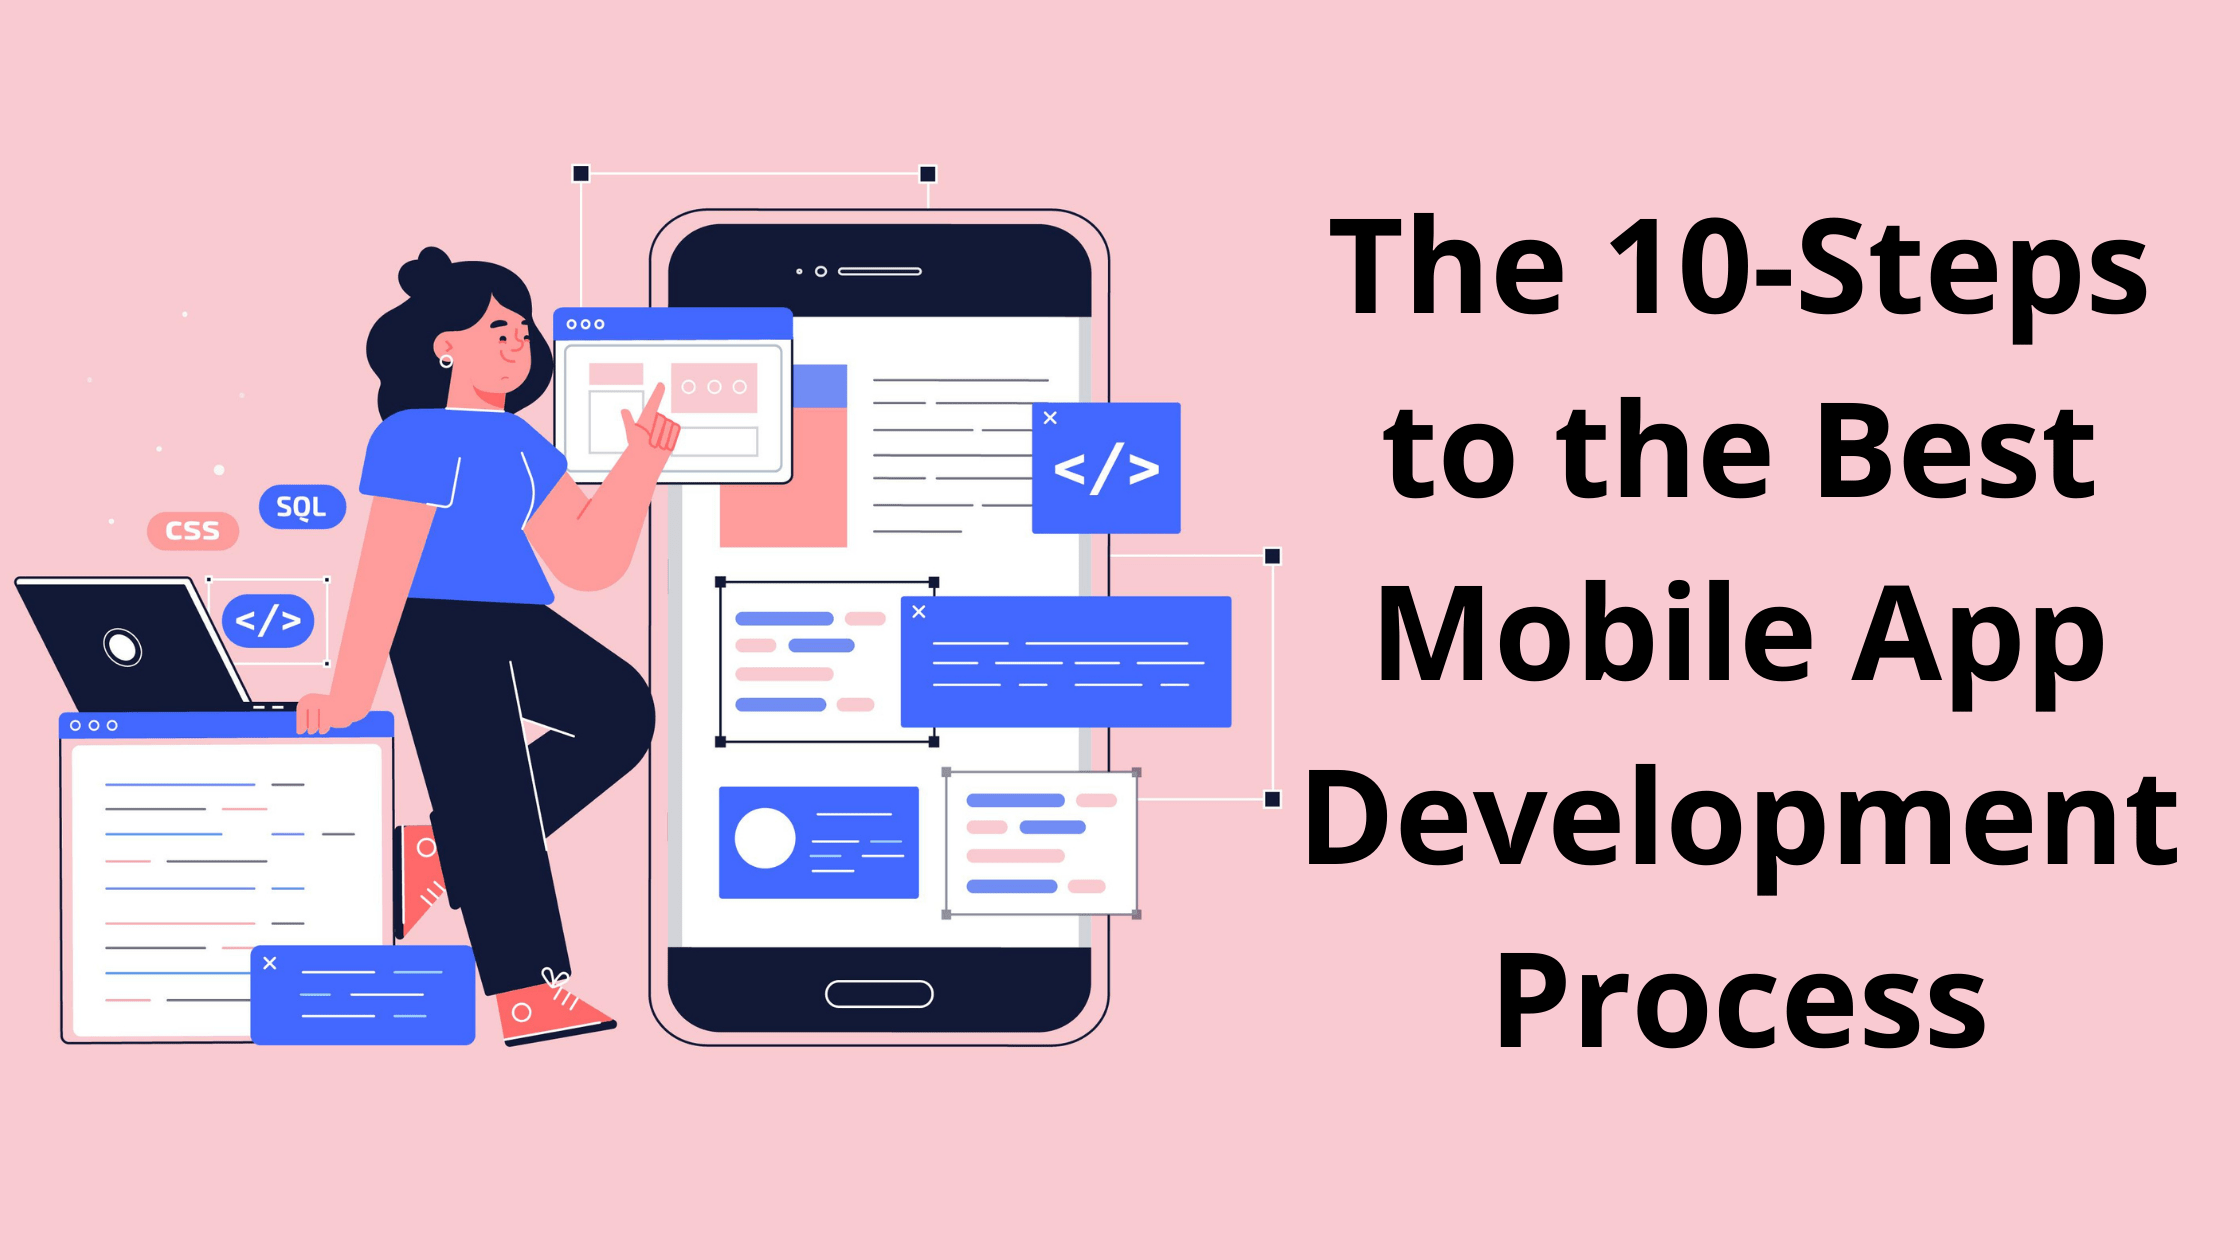 Build Your App with This 10-Step App Development Process